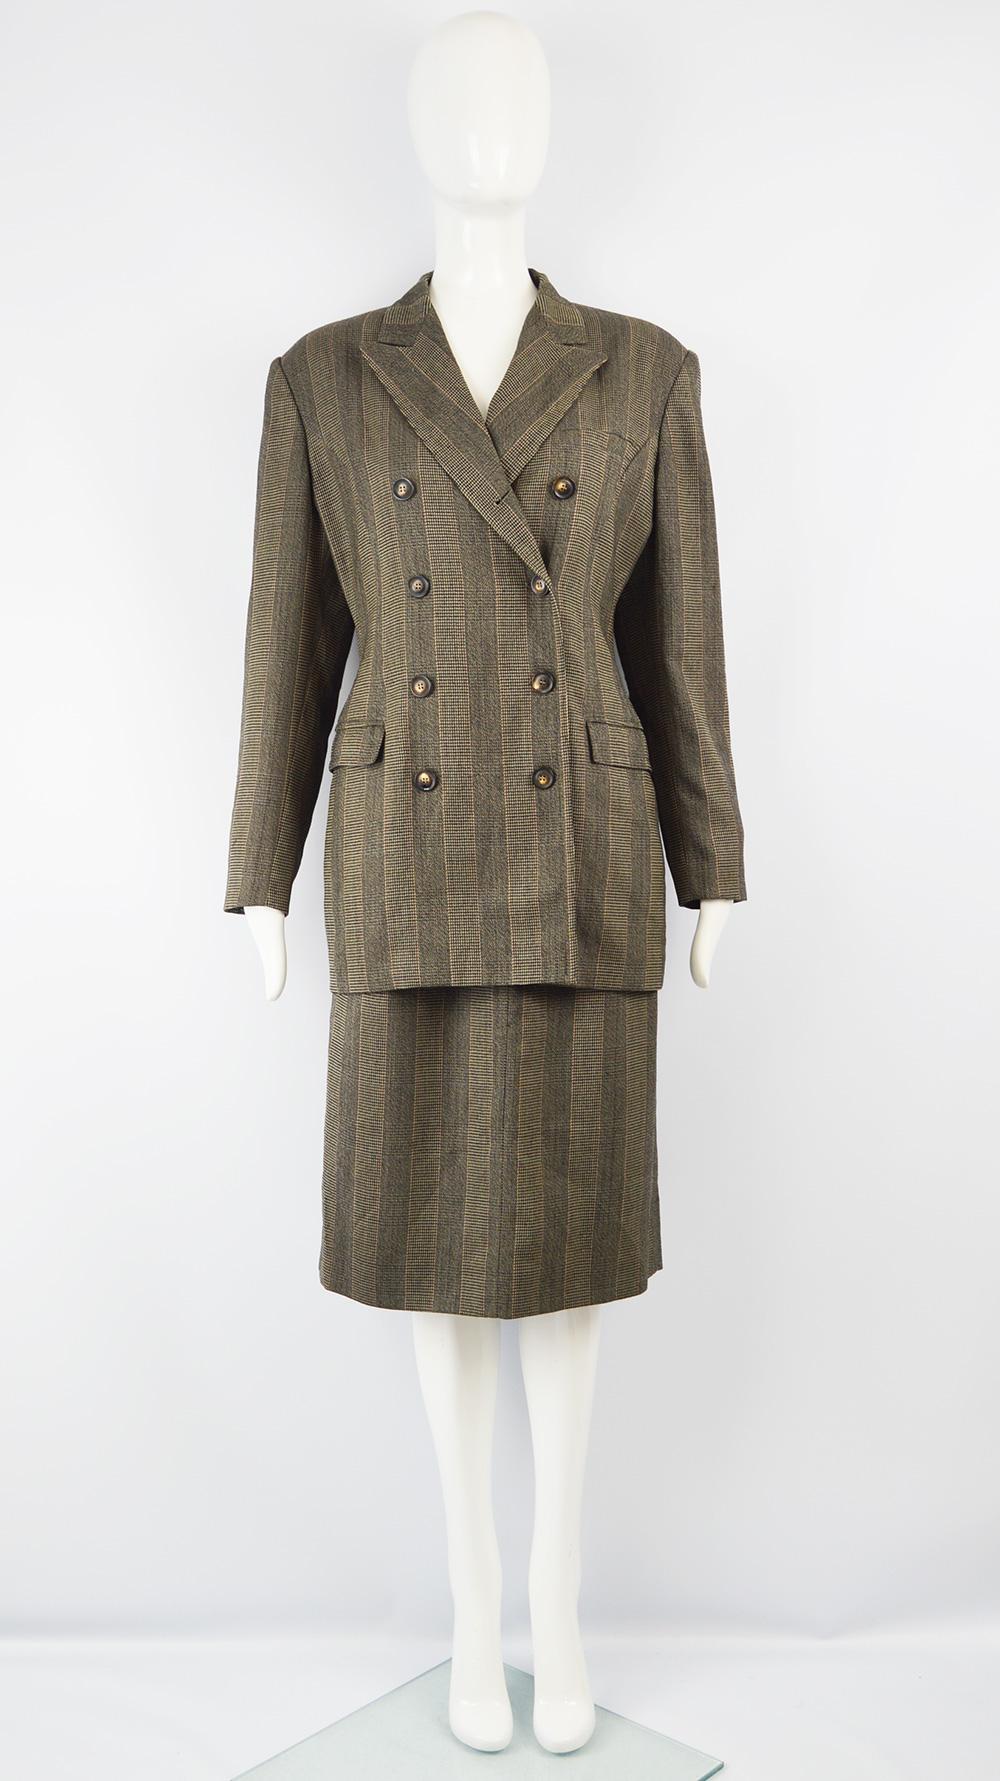 A chic vintage women's skirt suit from the 90s by luxury German fashion designer, Jil Sander. In a pure wool with a striped pattern woven throughout. The longline blazer jacket is double breasted with peaked lapels that gives a menswear inspired